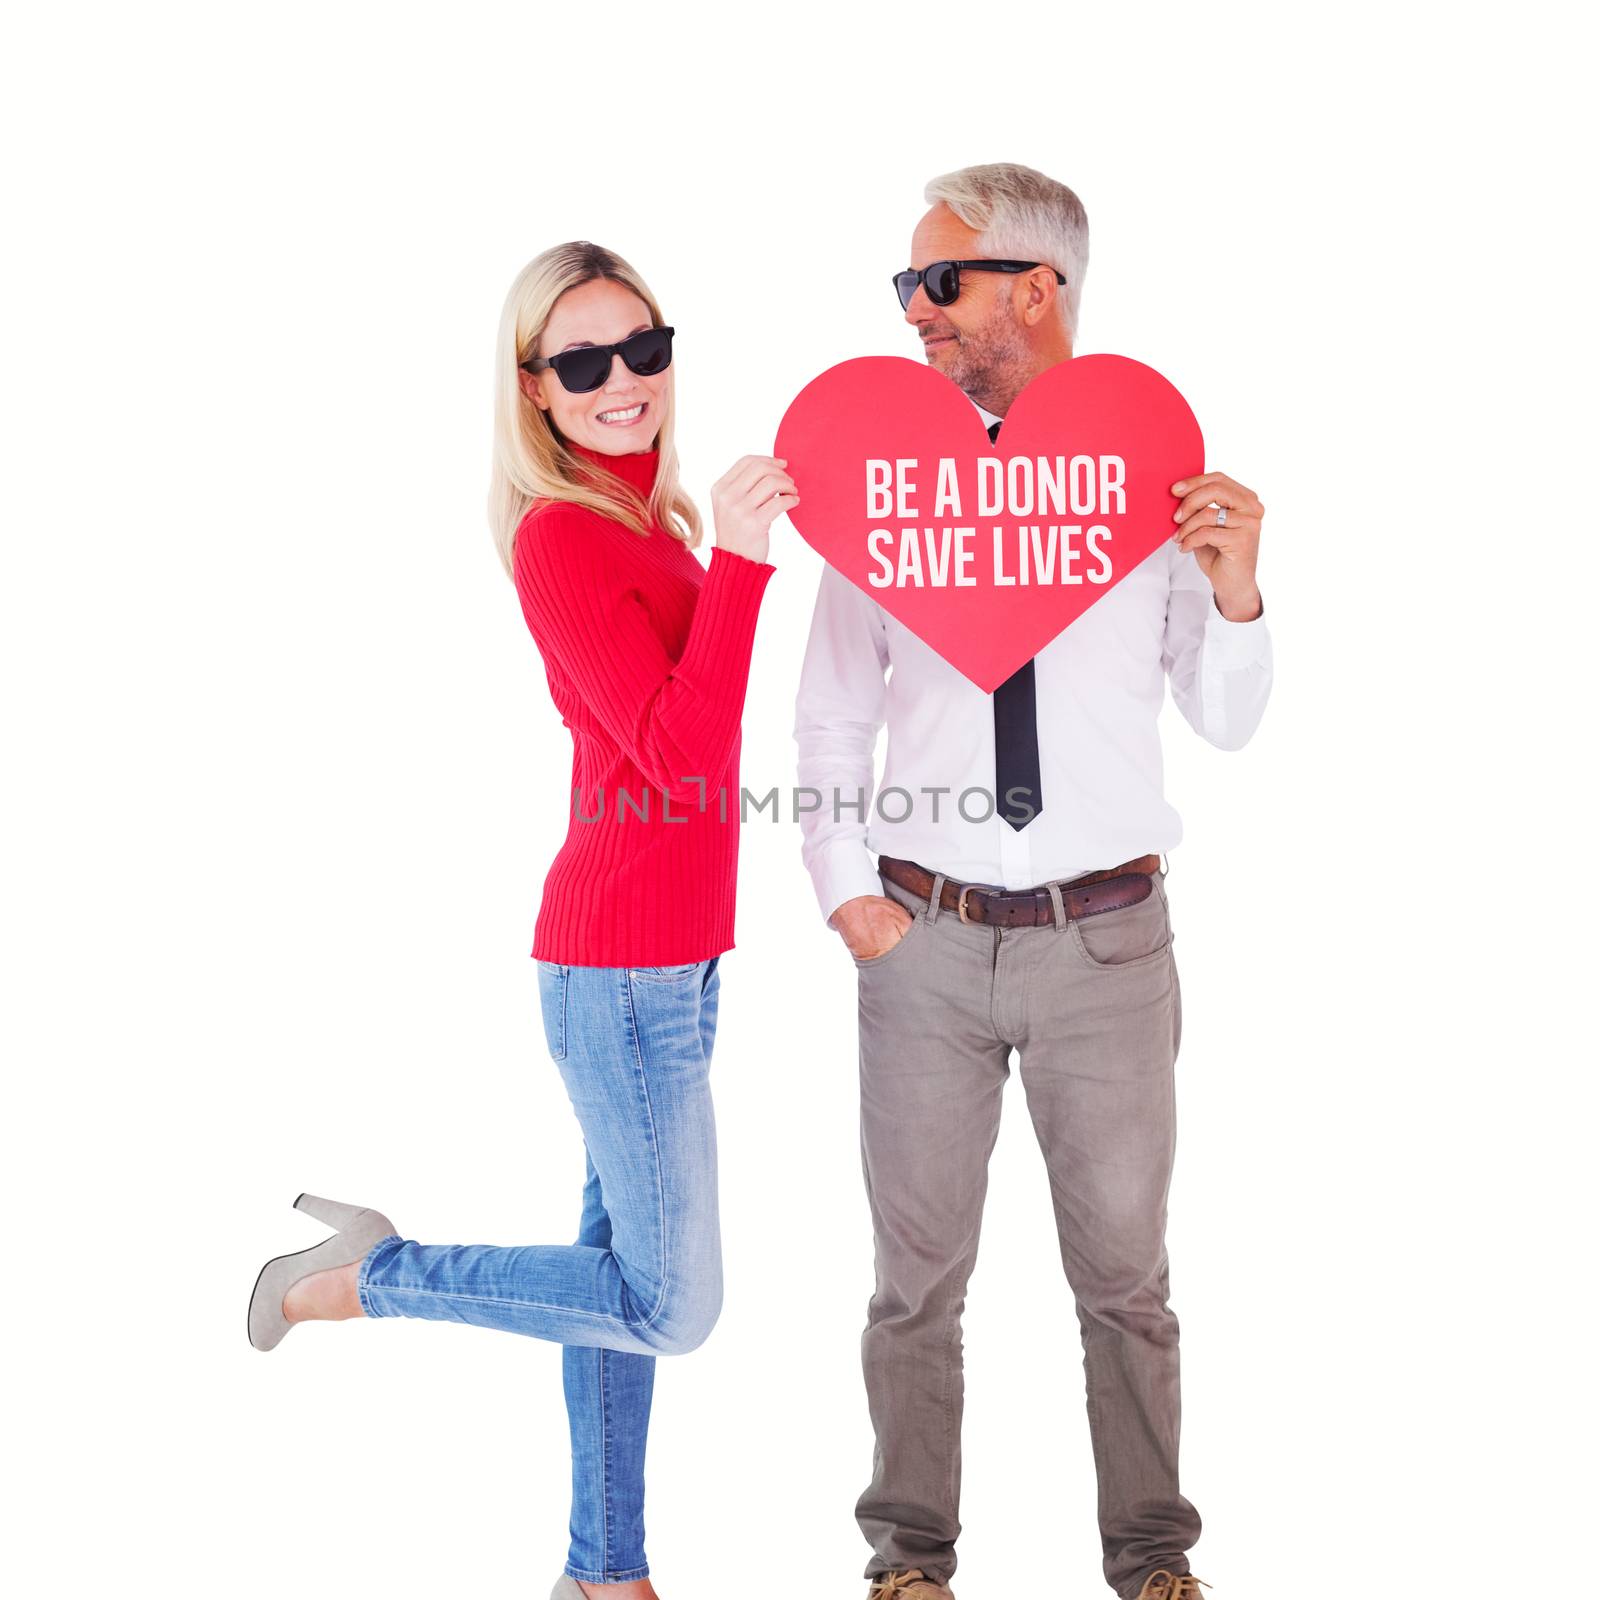 Cool couple holding a red heart together against be a donor save lives